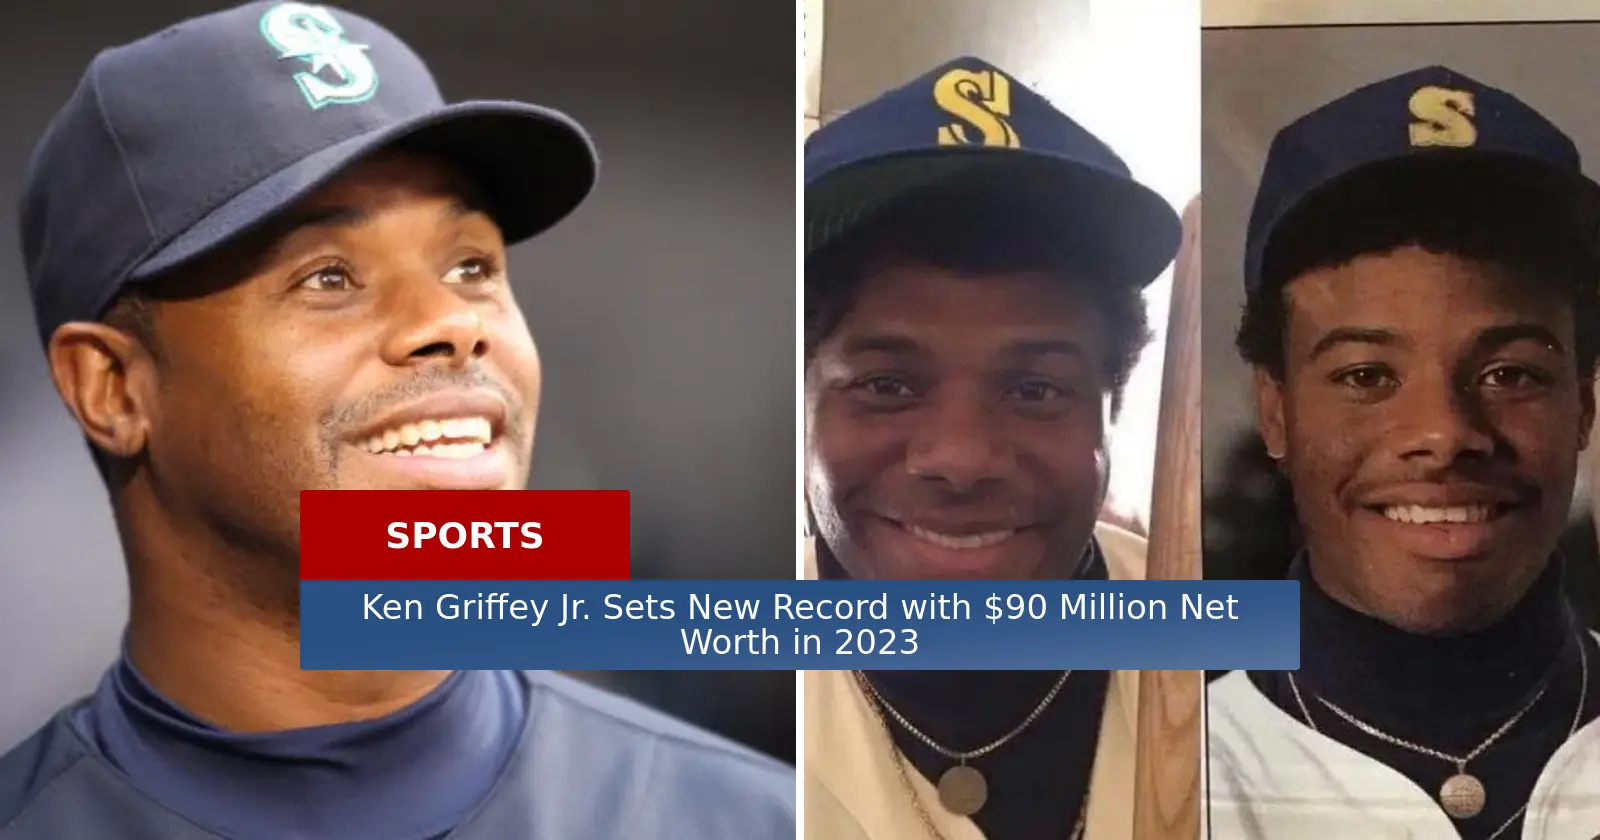 Ken Griffey Jr. Sets New Record with Millions Net Worth in 2023 